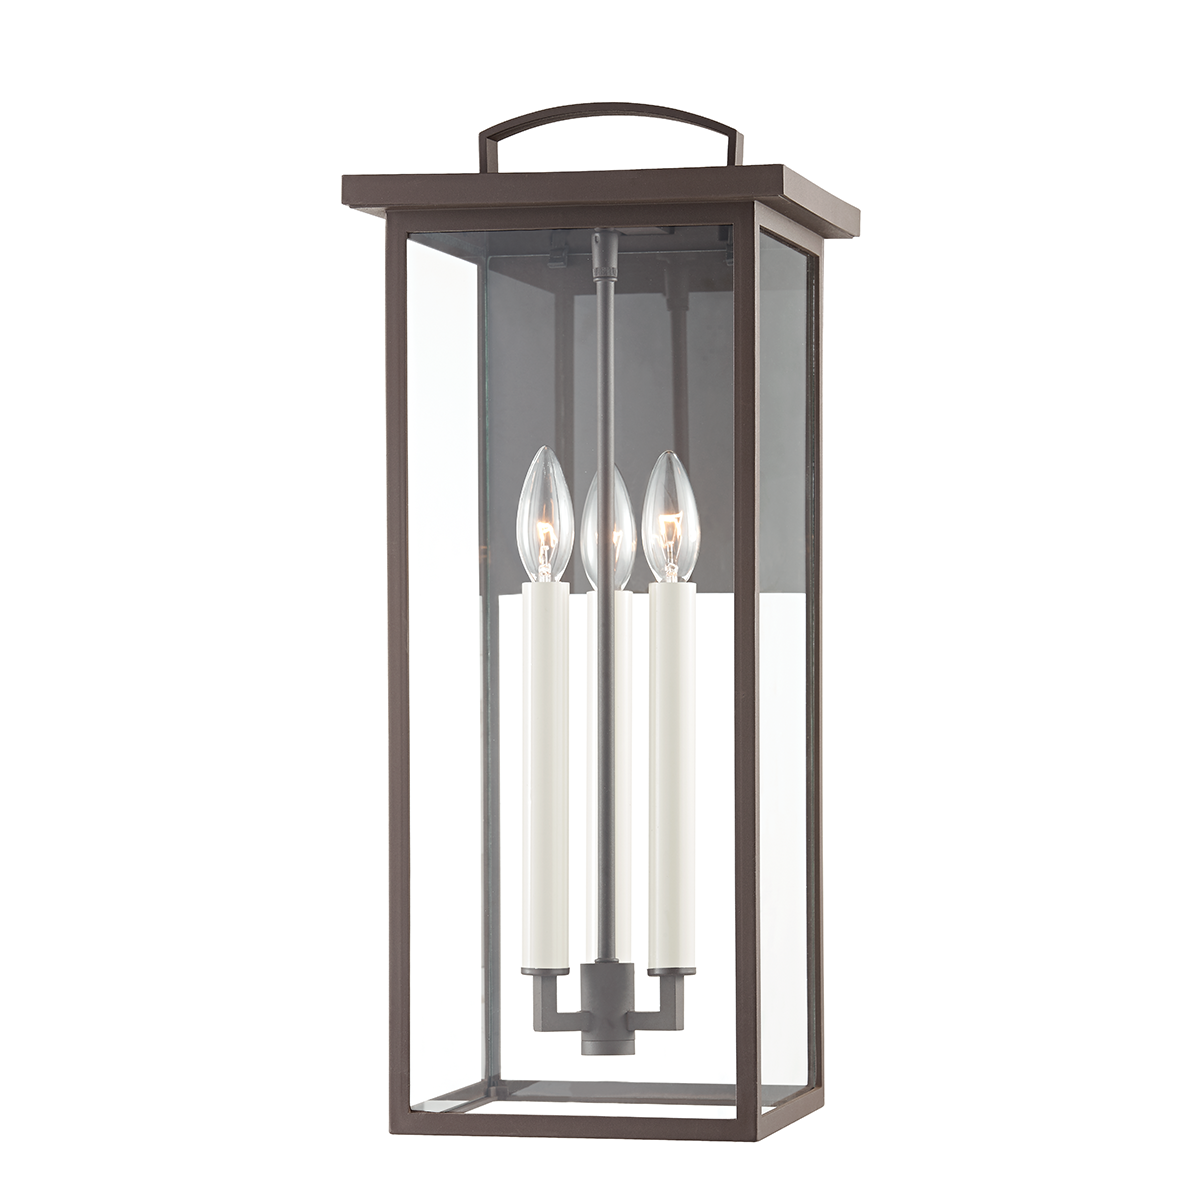 Troy EDEN 3 LIGHT LARGE EXTERIOR WALL SCONCE B7523 Outdoor l Wall Troy Lighting TEXTURED BRONZE  